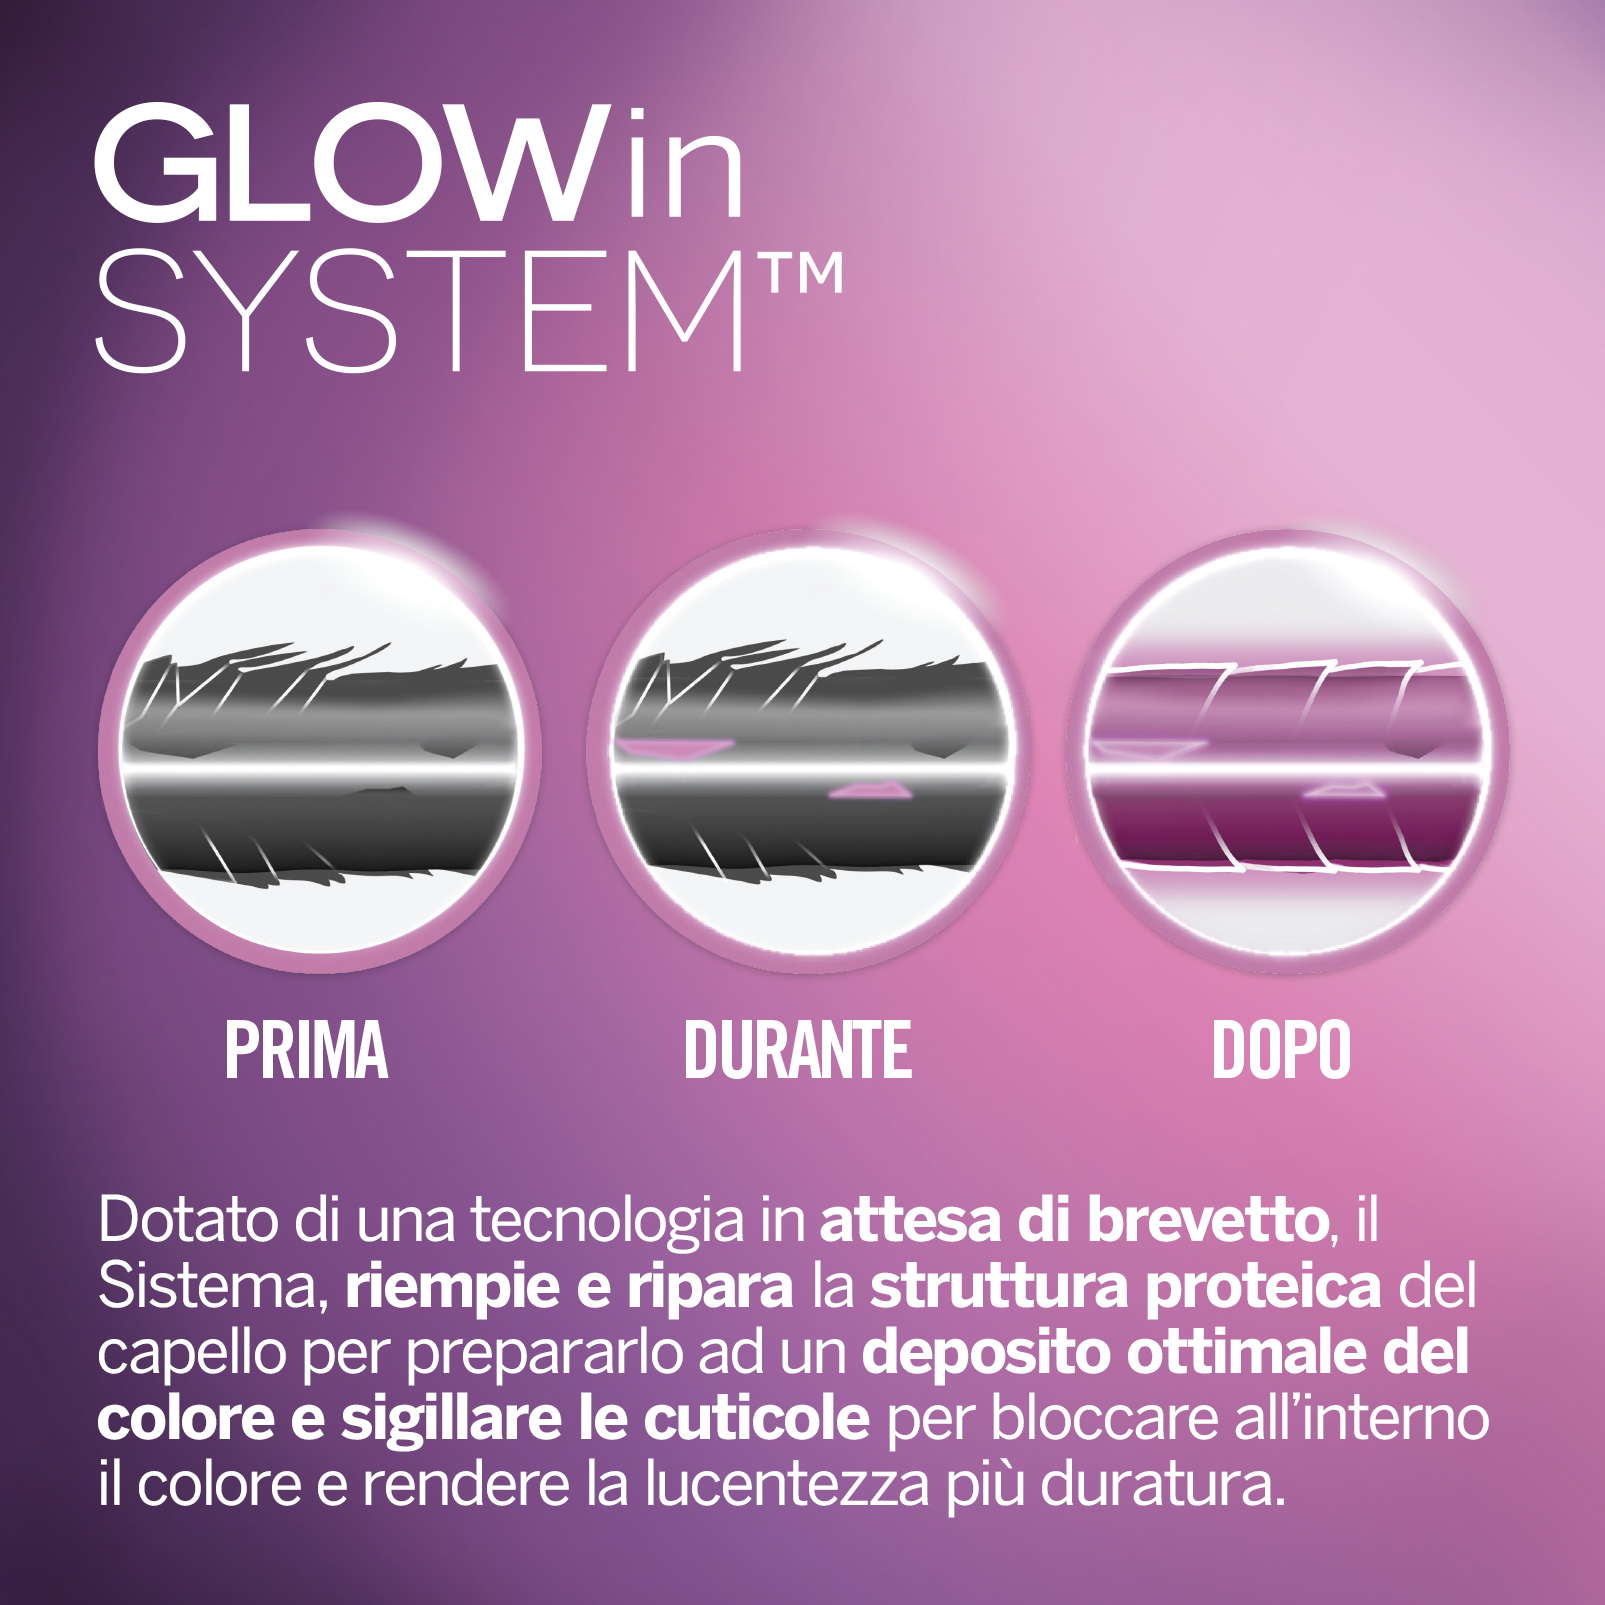 Glow in System